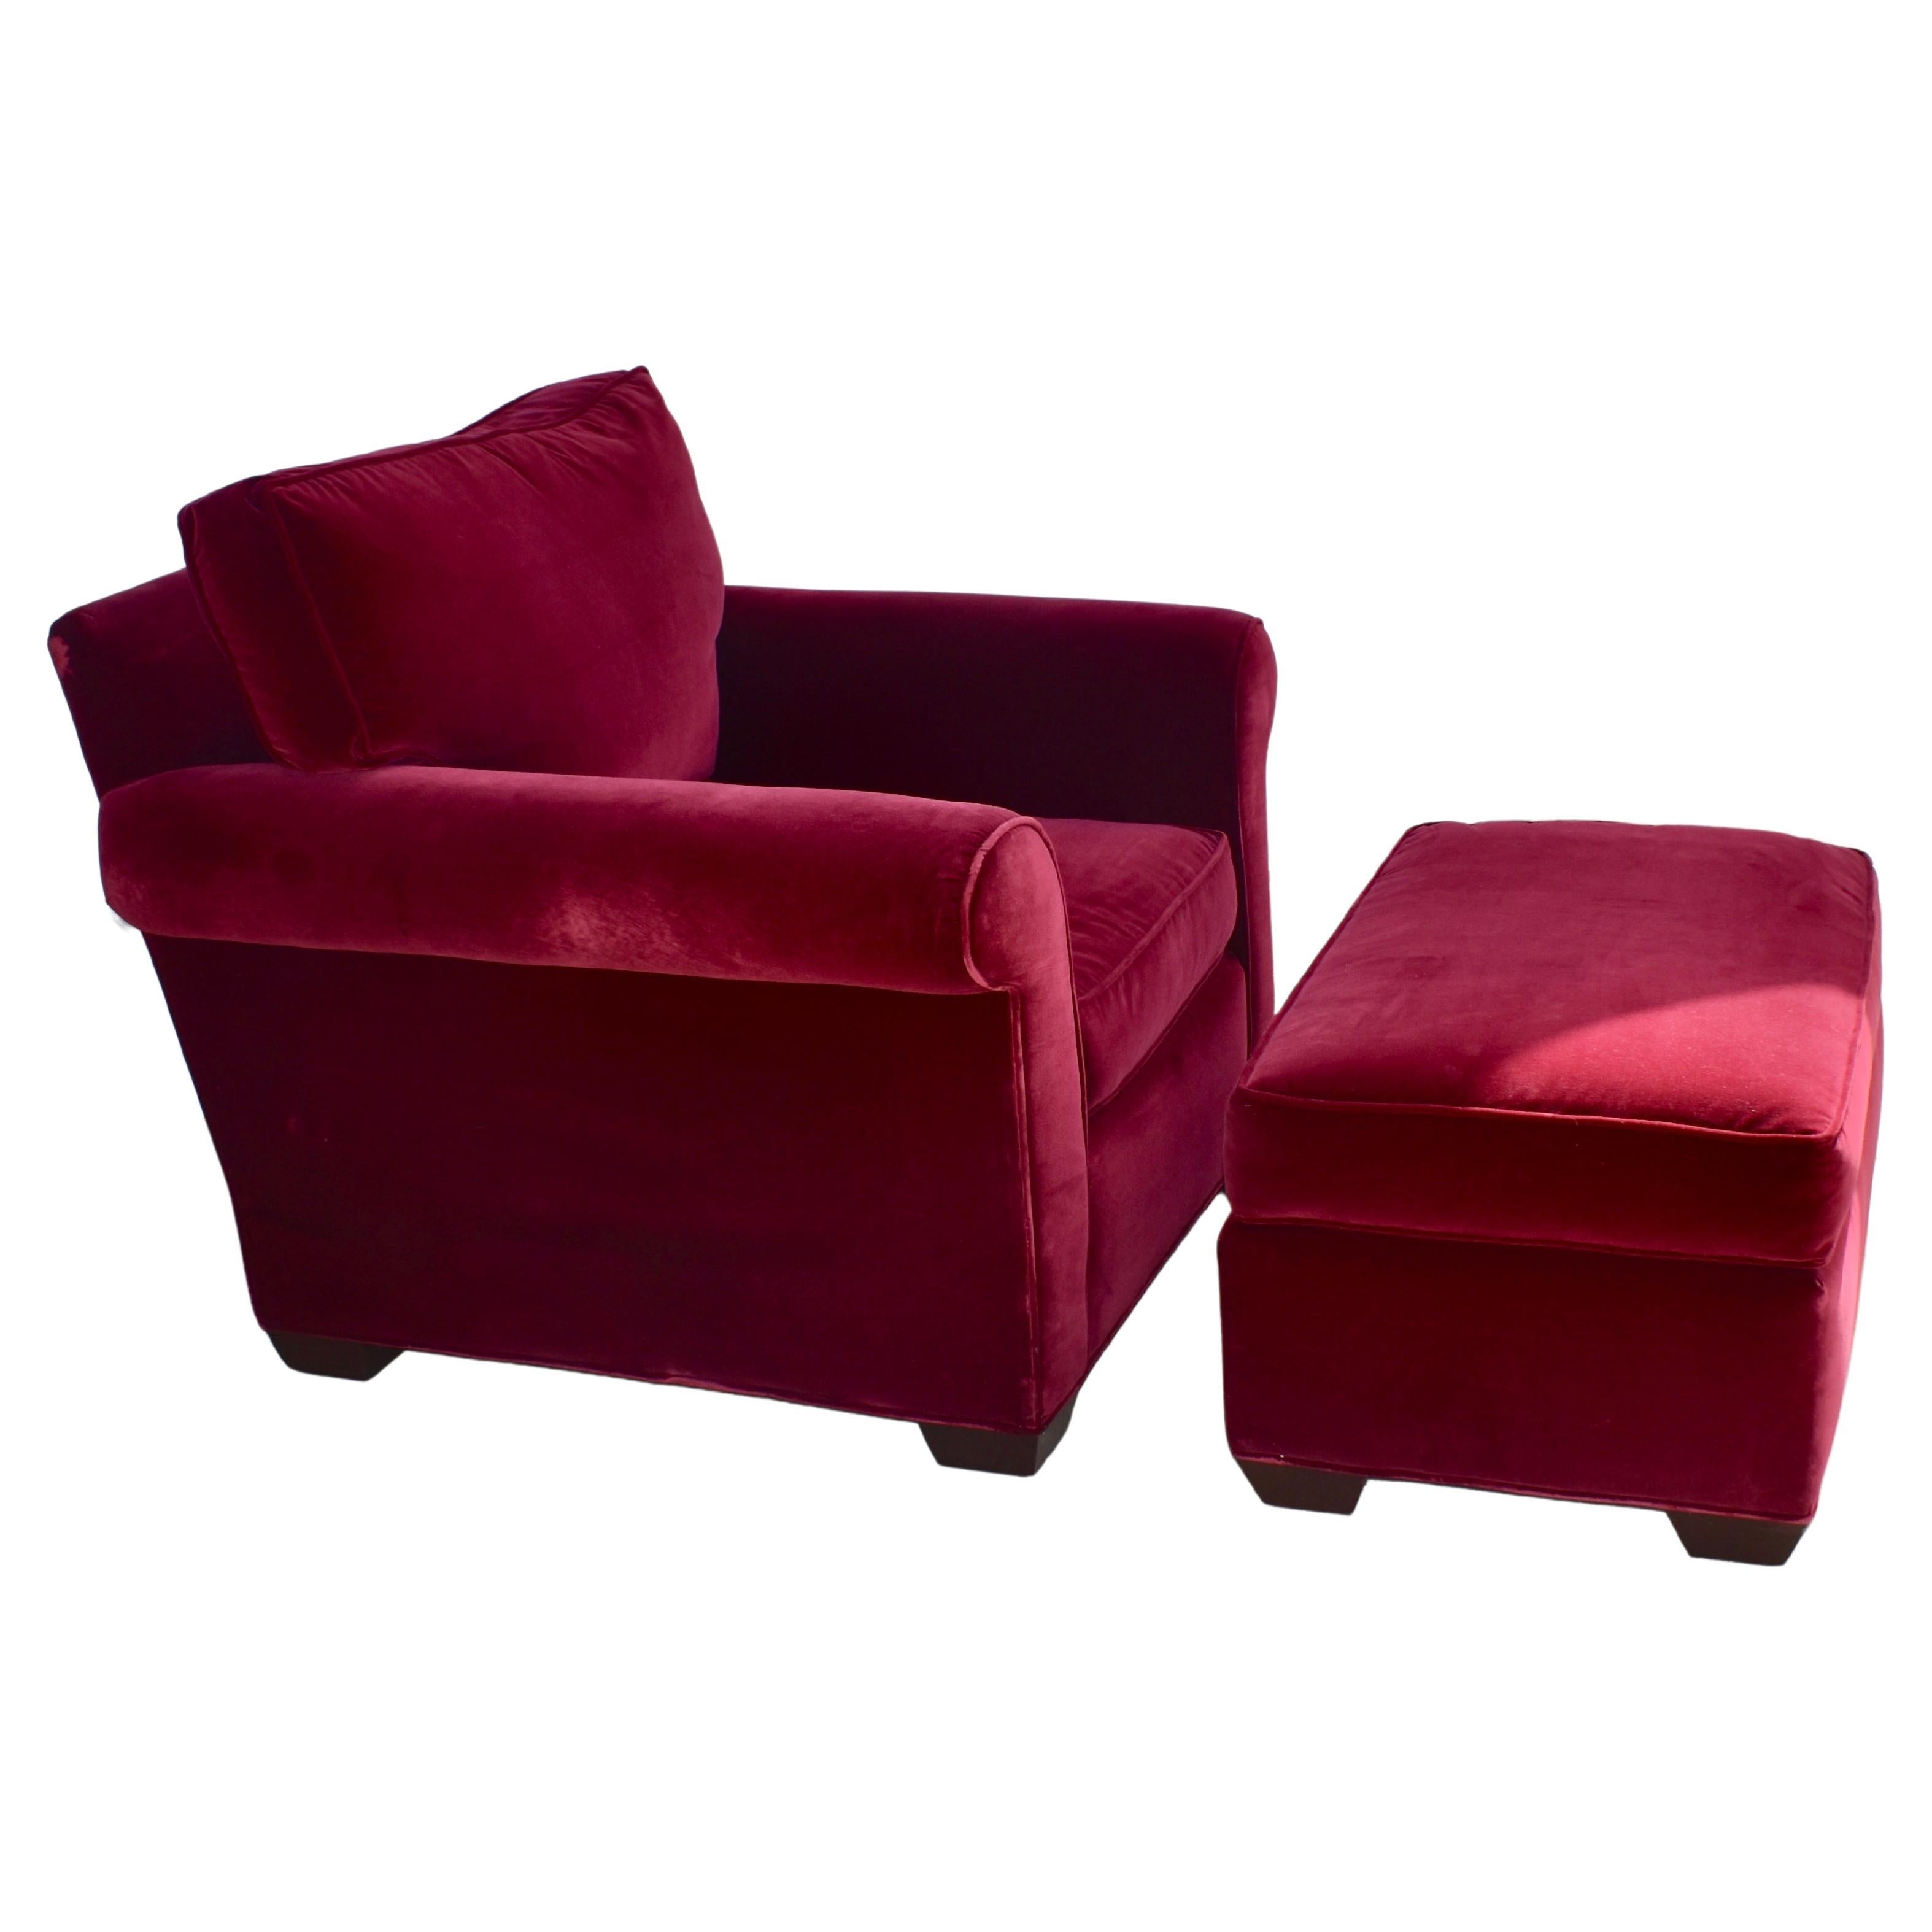 Decorator Built Red Velvet Club Chair and Ottoman